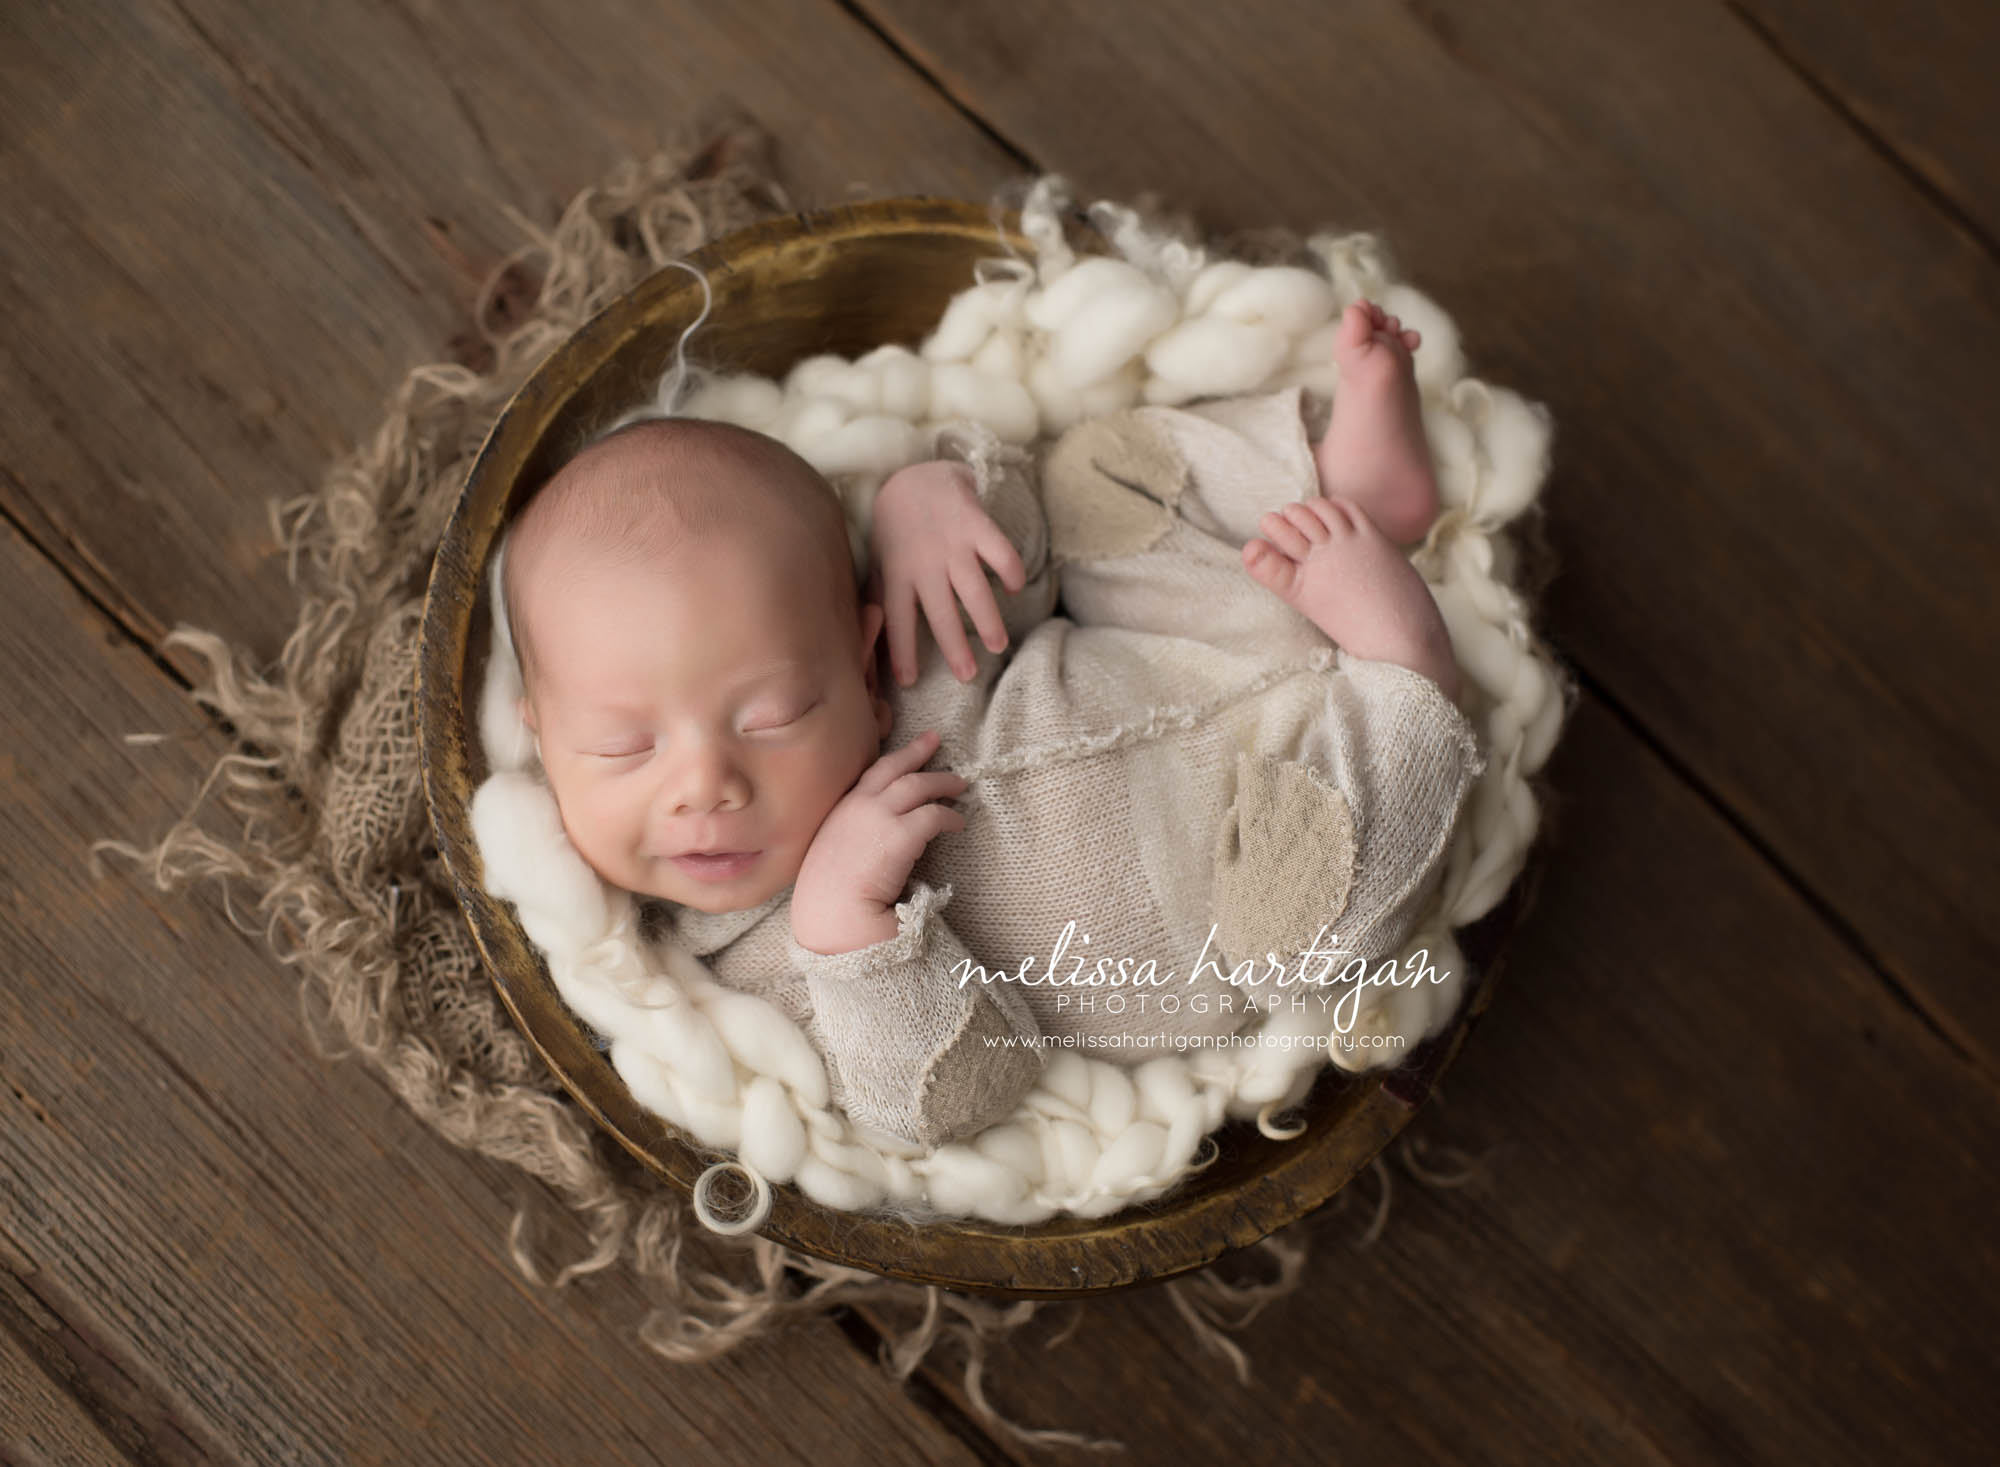 Melissa Hartigan Photography CT Newborn Photographer Taave CT Newborn Session baby boy wearing cream knit onesie sleeping in a wooden bowl with chunky white knit blanket smiling